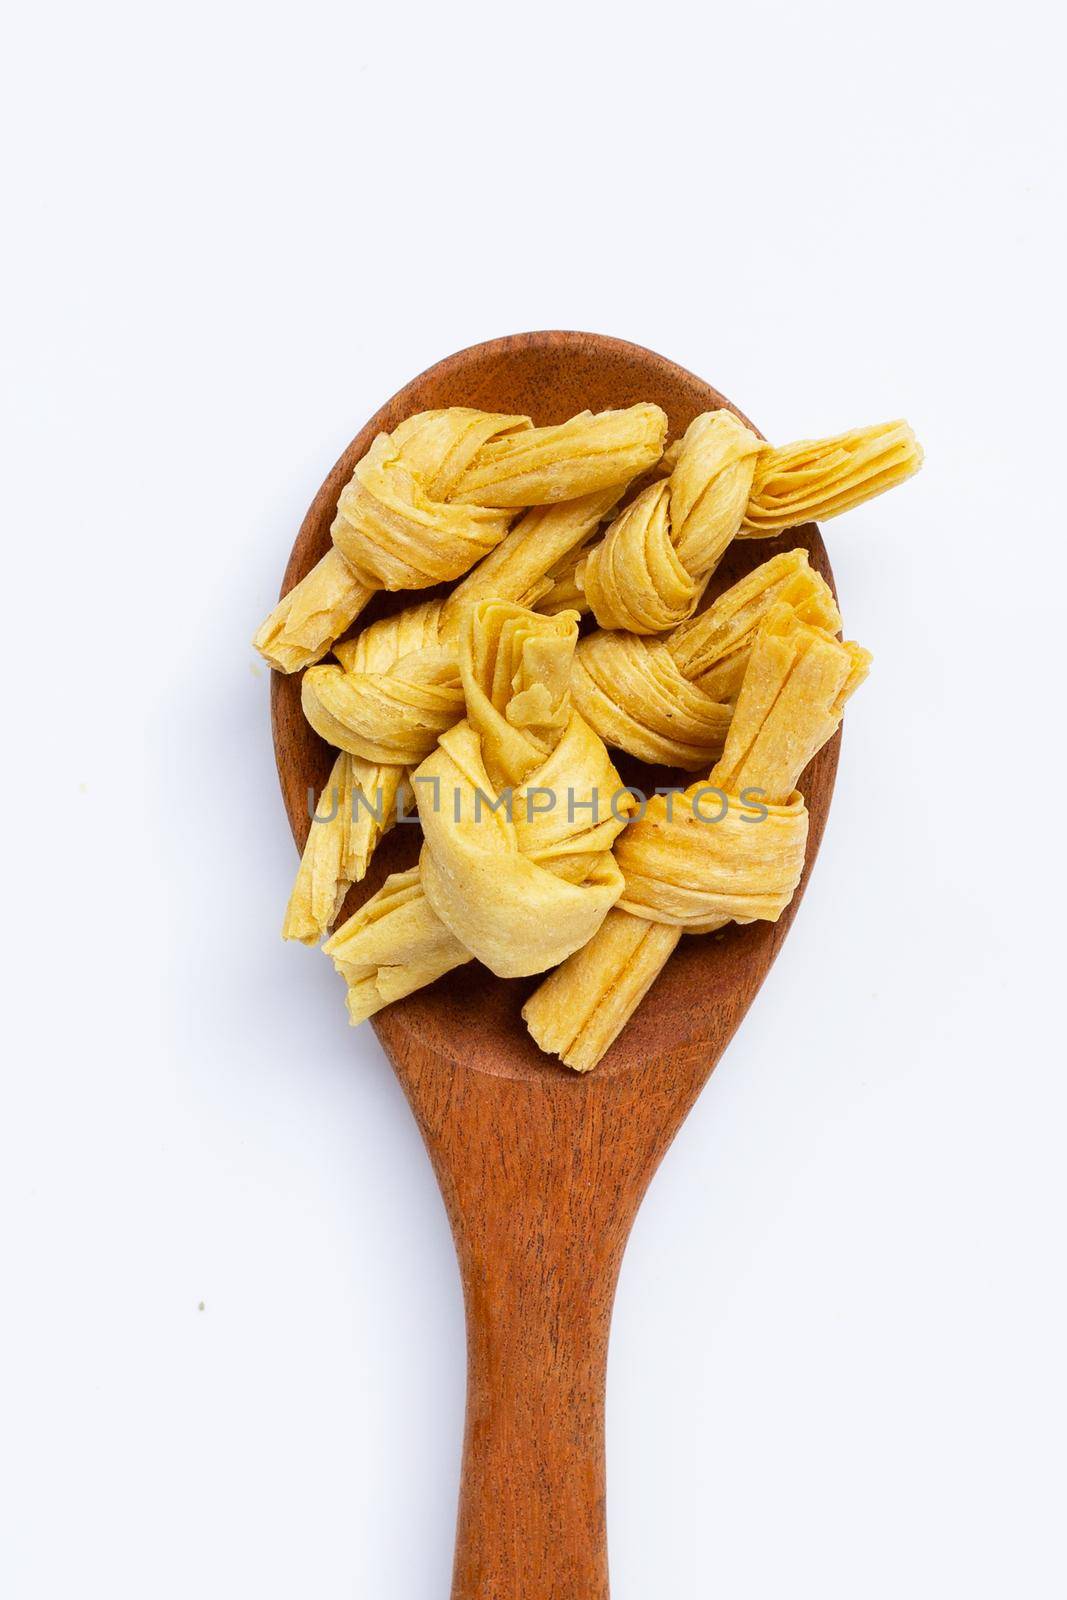 Dried bean curd knot on white background.